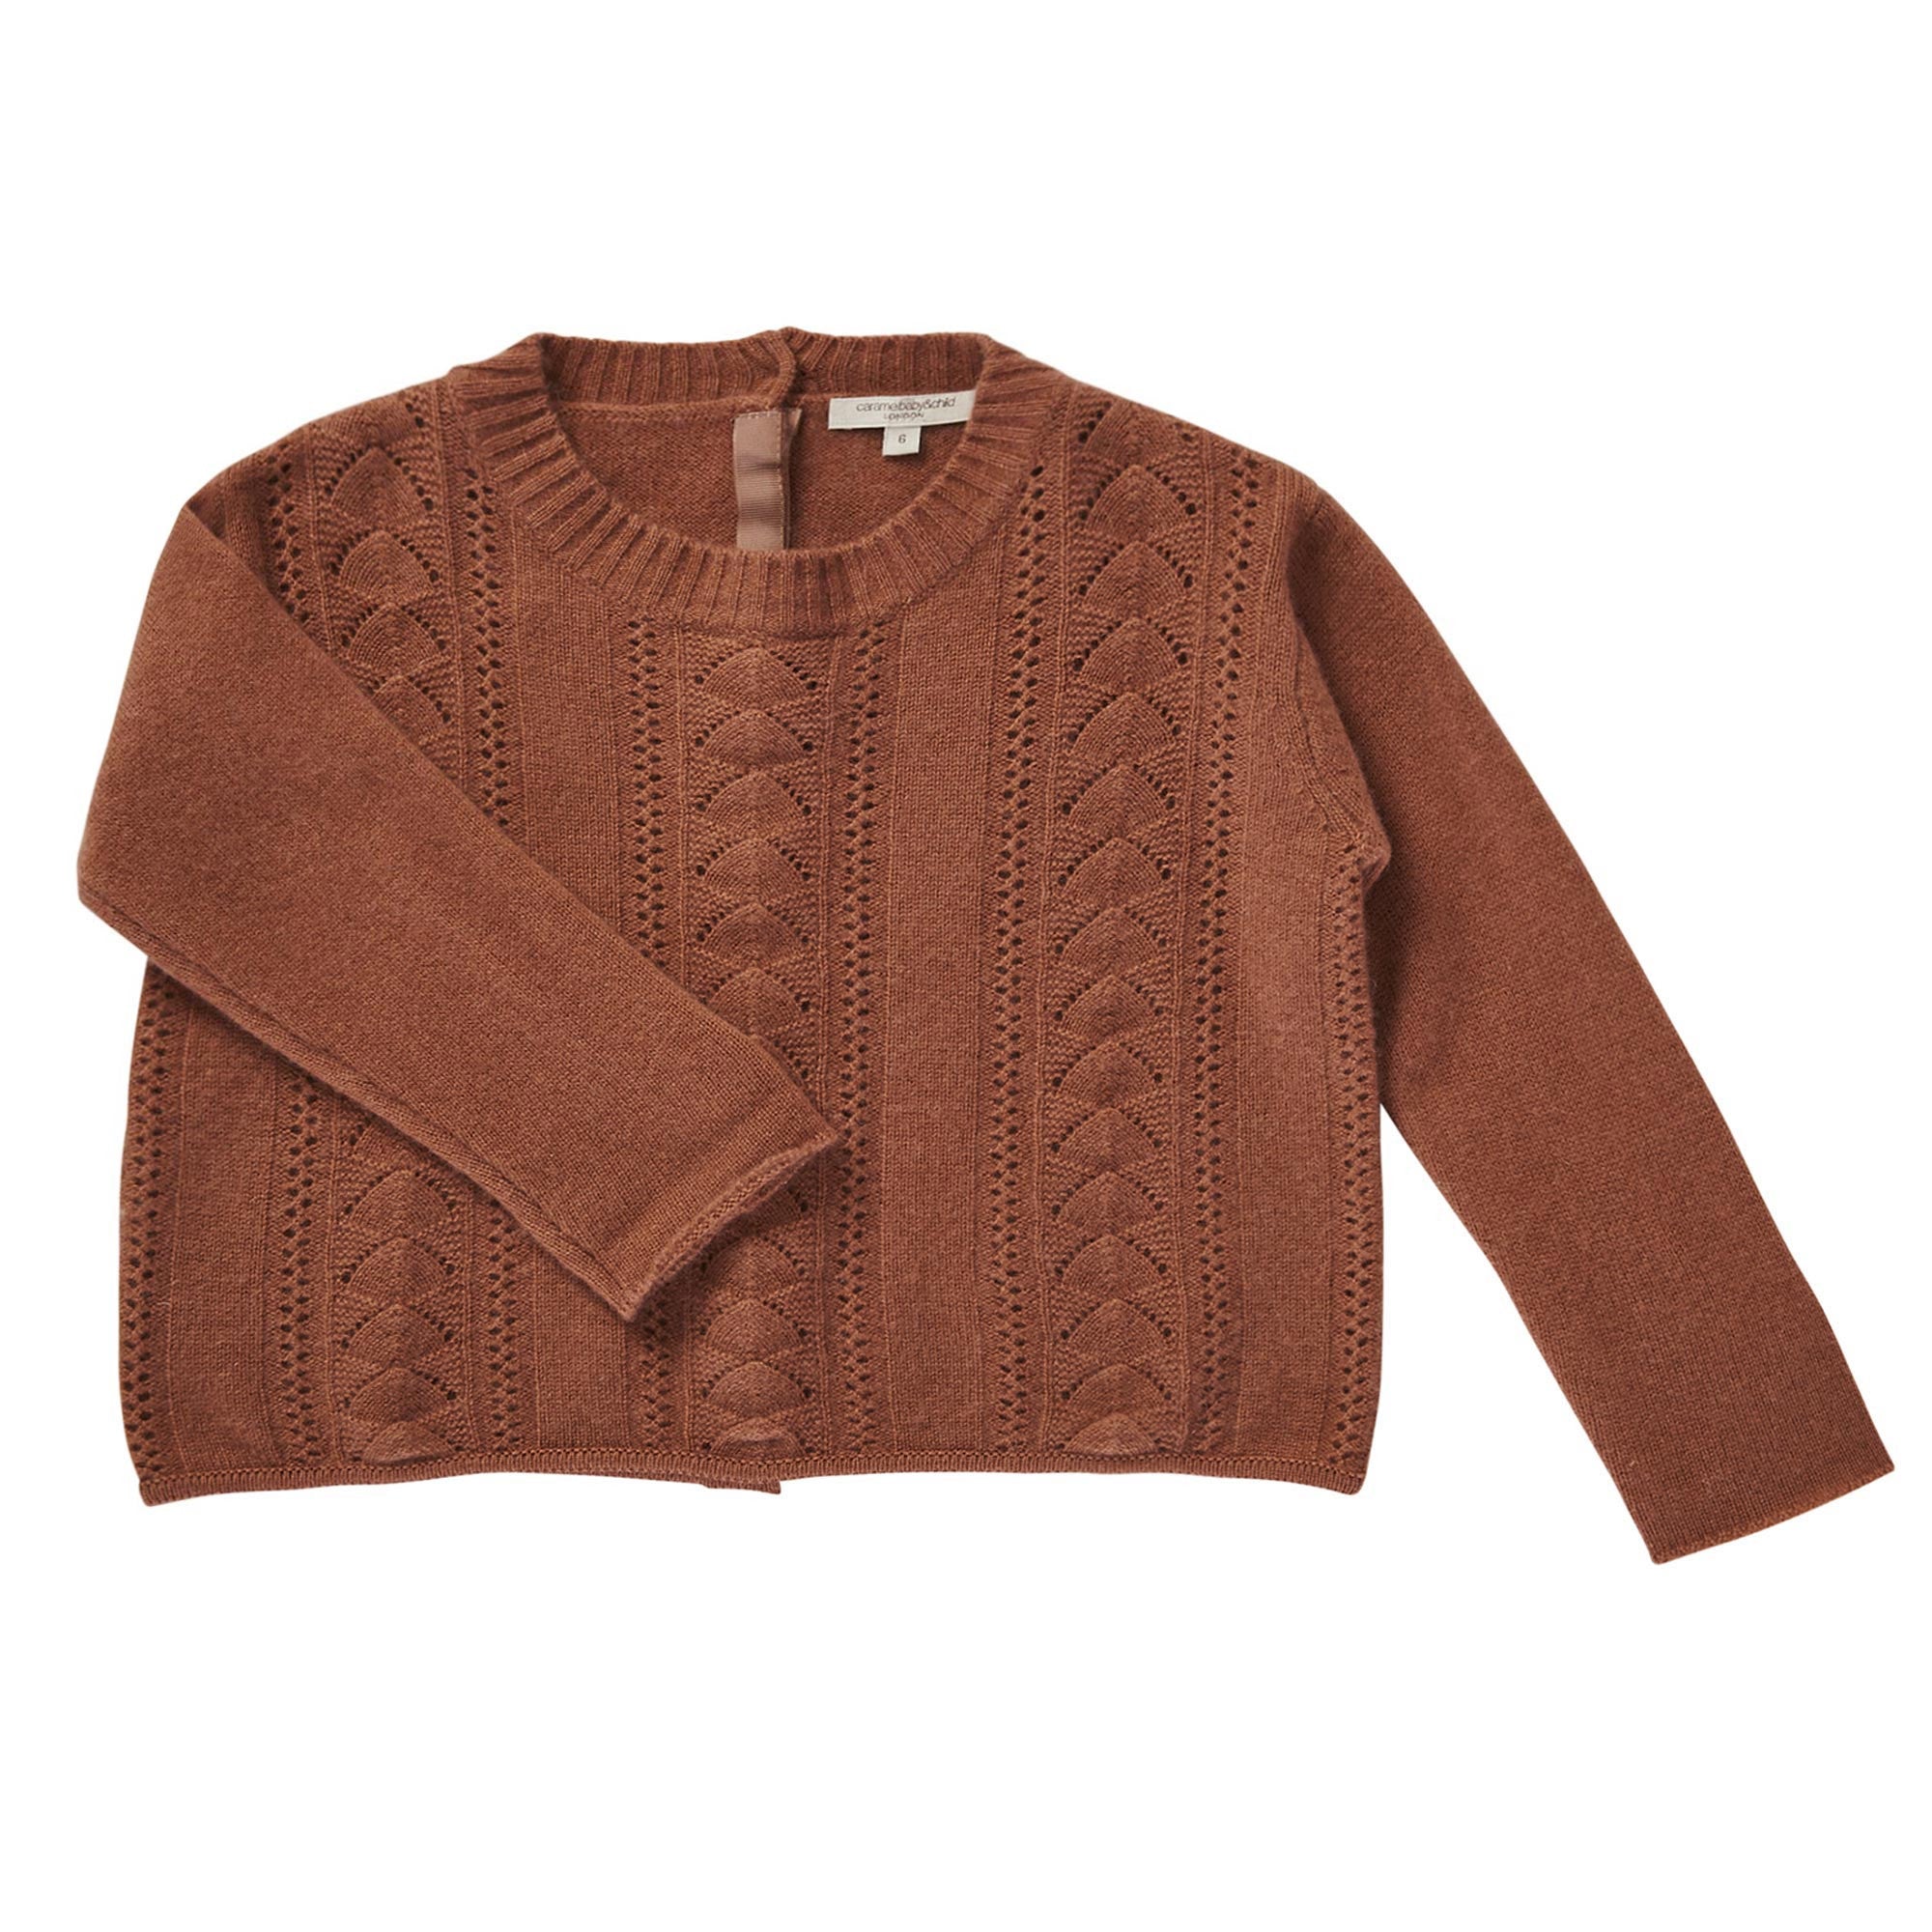 Boys Brown Ribbed Knitted Sweater - CÉMAROSE | Children's Fashion Store - 1